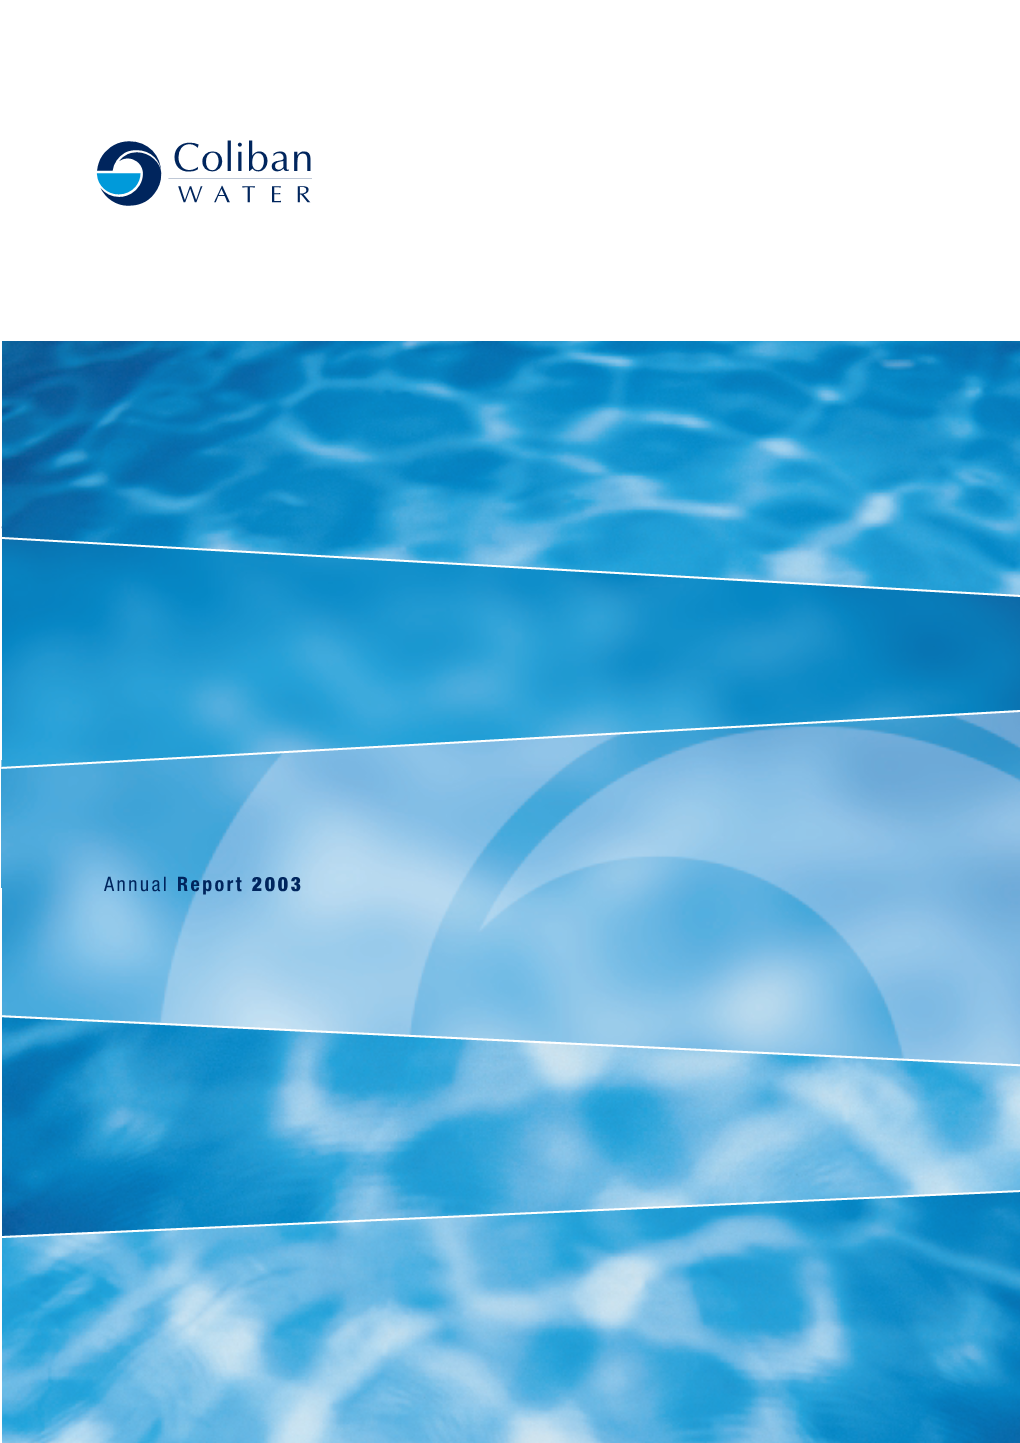 Annual Report 2003 BUILDING a SUSTAINABLE WATER BUSINESS >ECONOMIC PERFORMANCE >ENVIRONMENTAL PERFORMANCE >SOCIAL PERFORMANCE